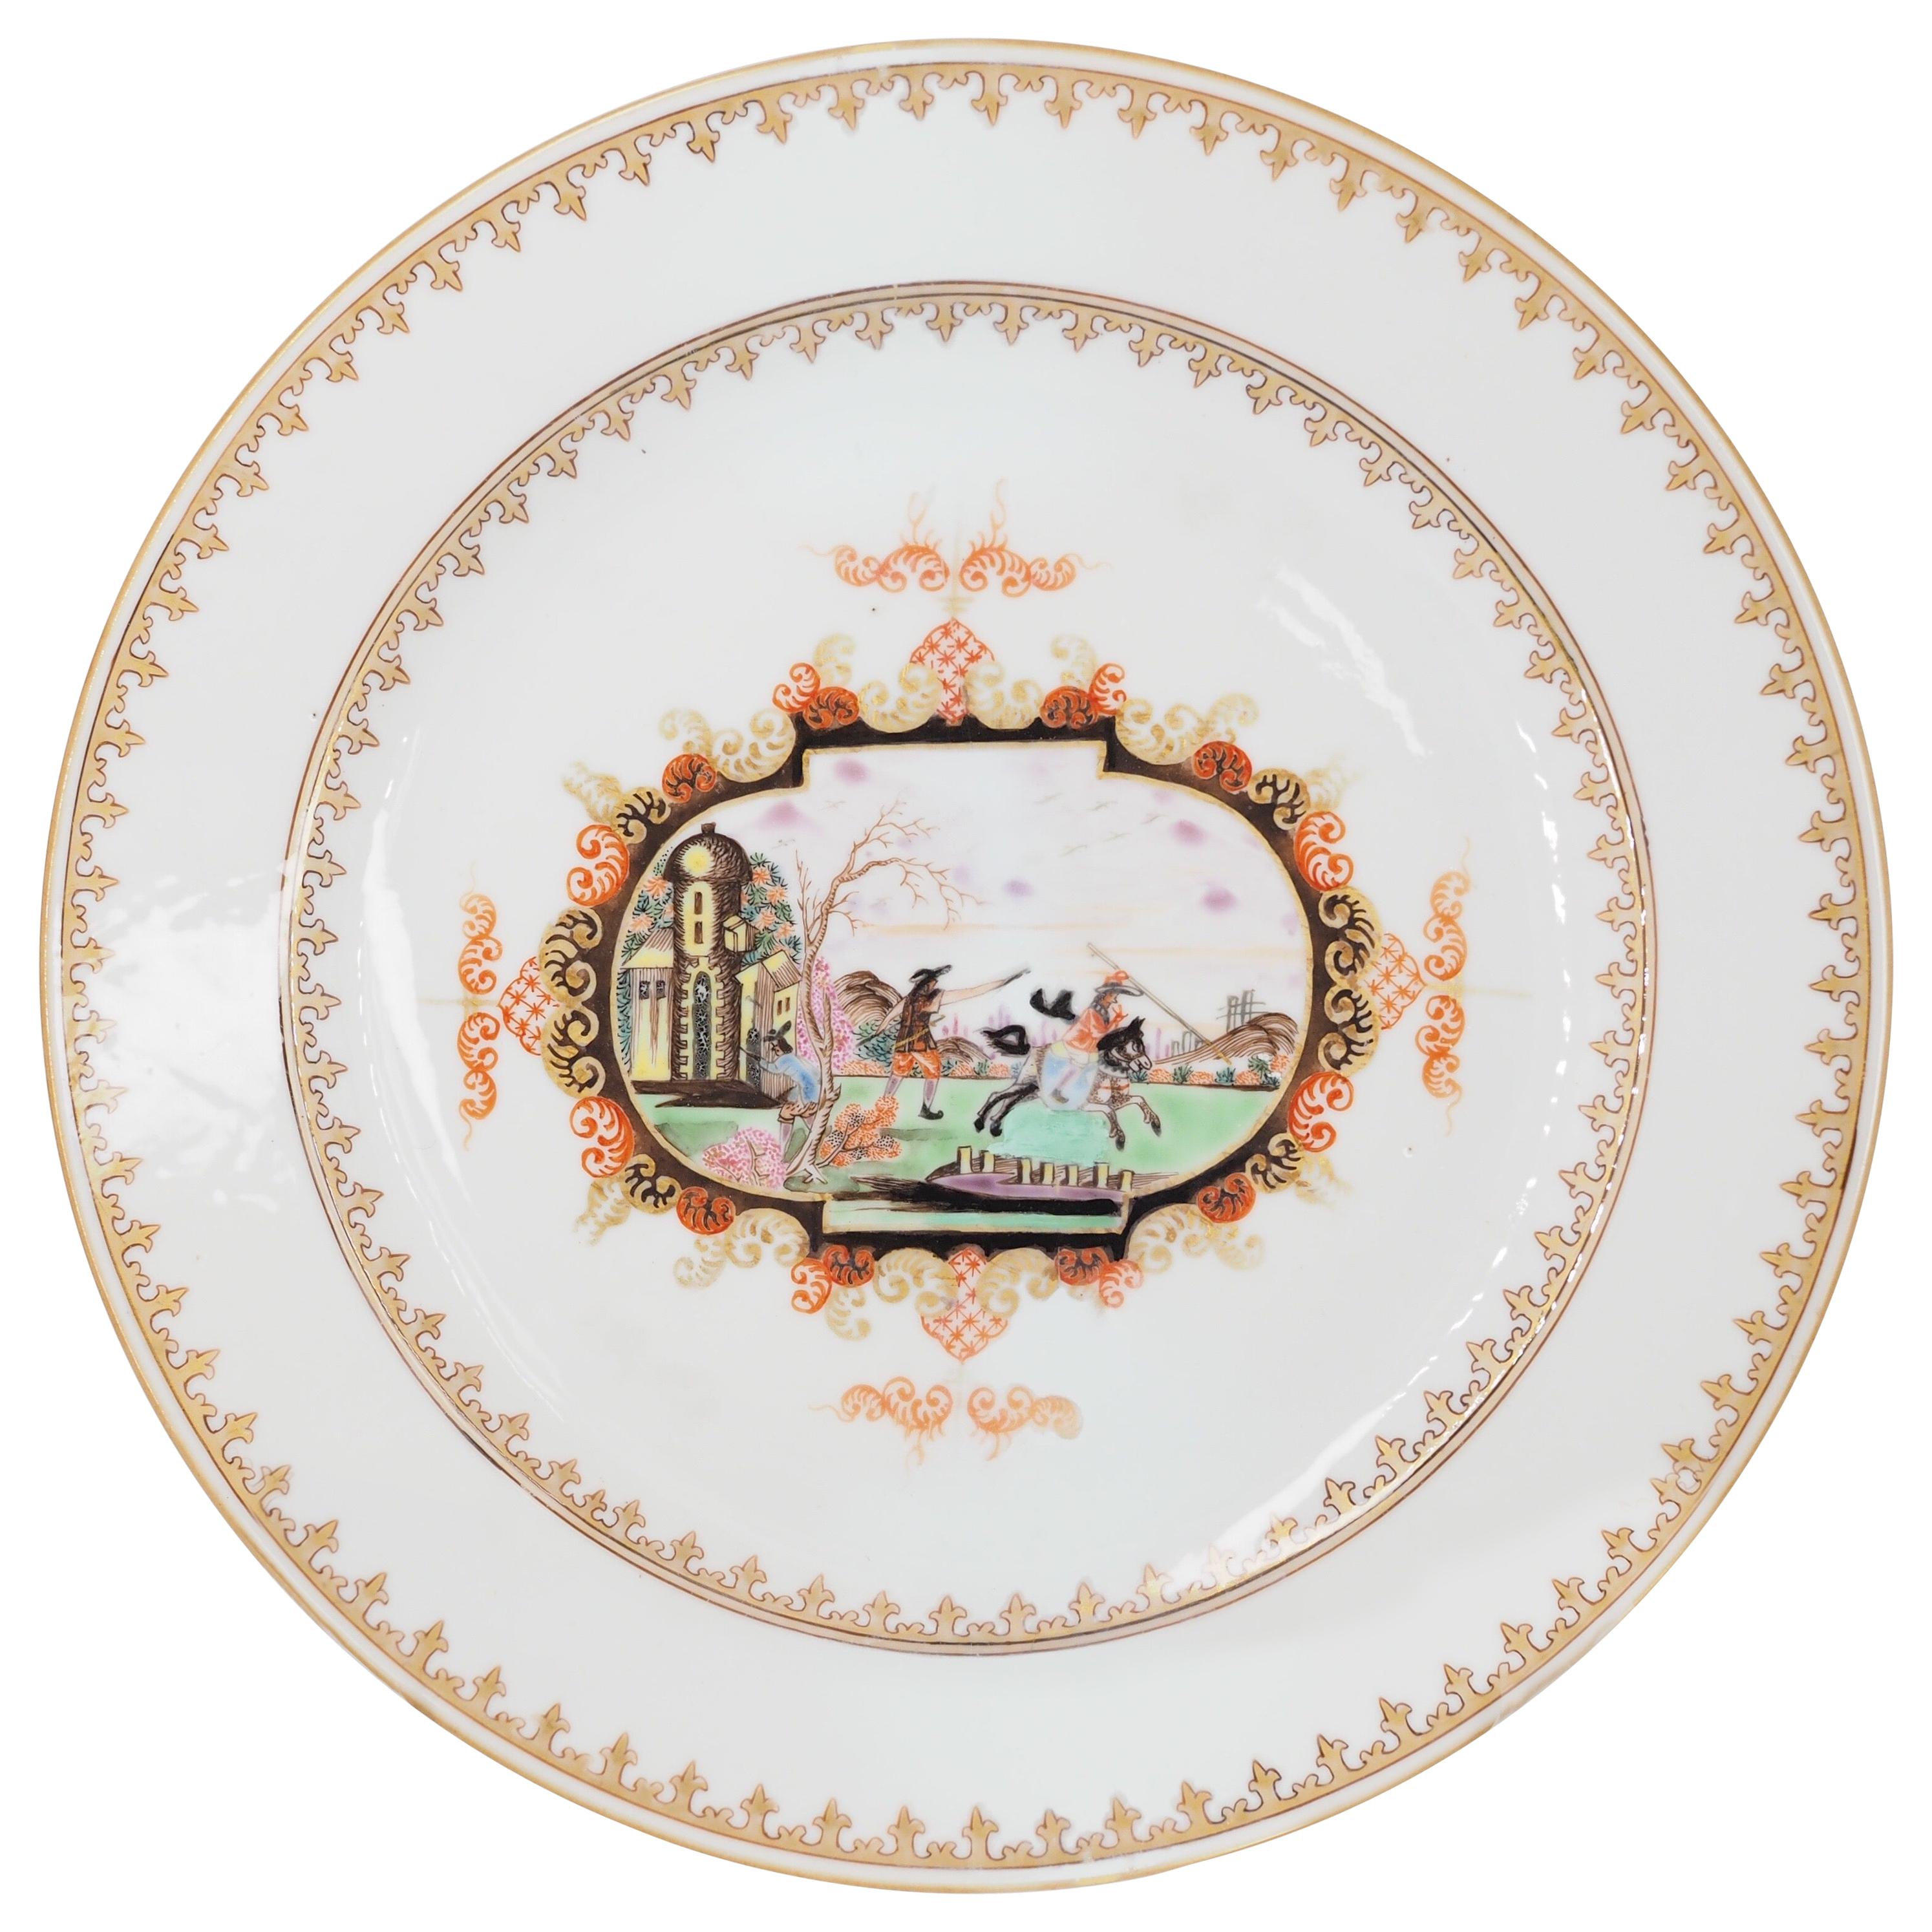 Chinese Export Plate with Meissen Style Cartouche Landscape, c.1730 For Sale